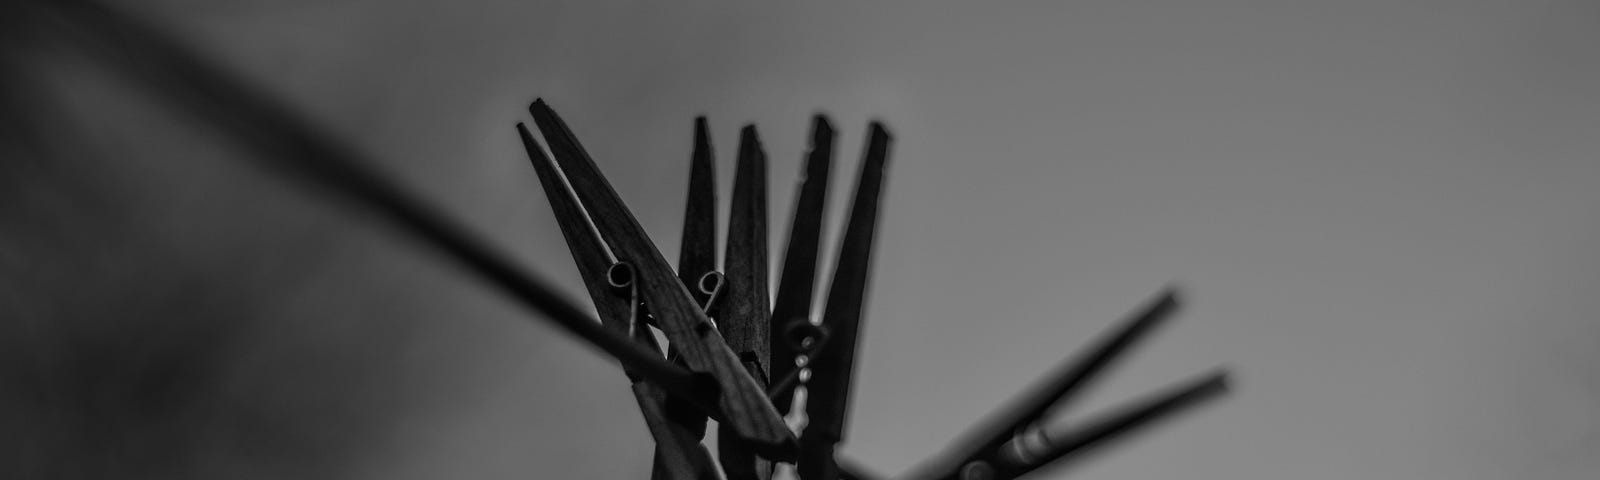 Black and white photo of clothe line with 4 clothes pins on them.